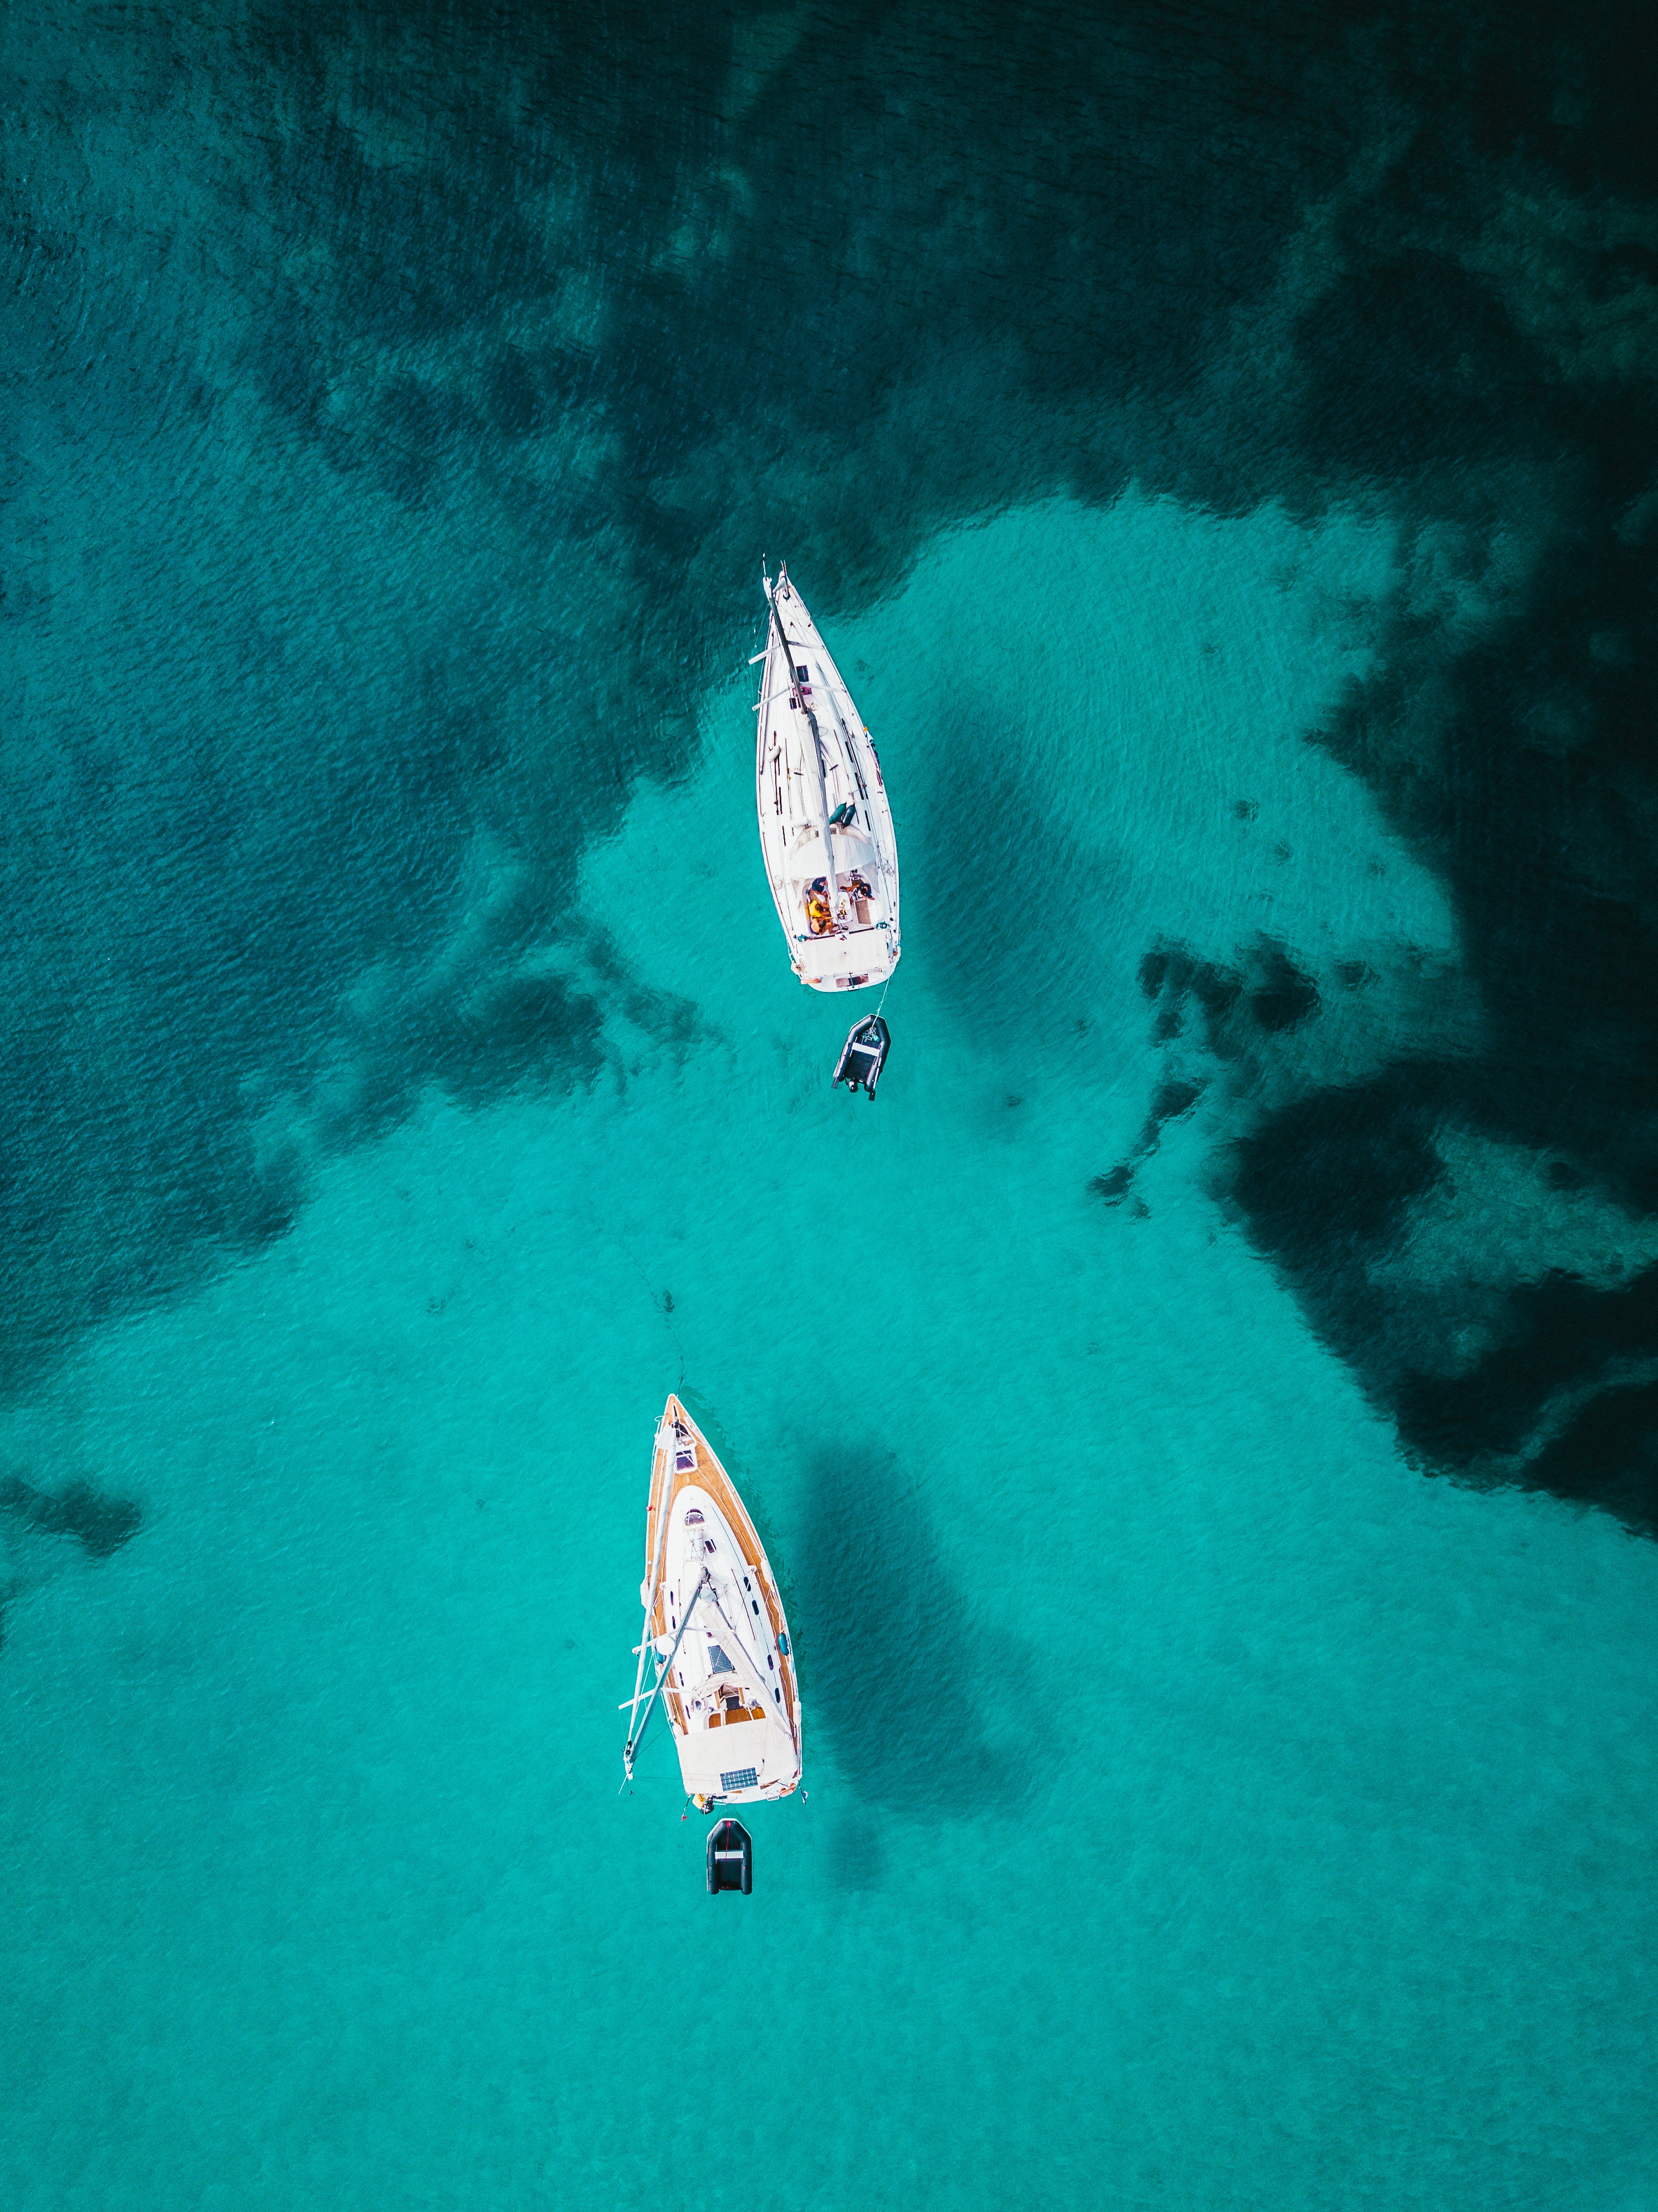 nature, boats, water, view from above, ocean